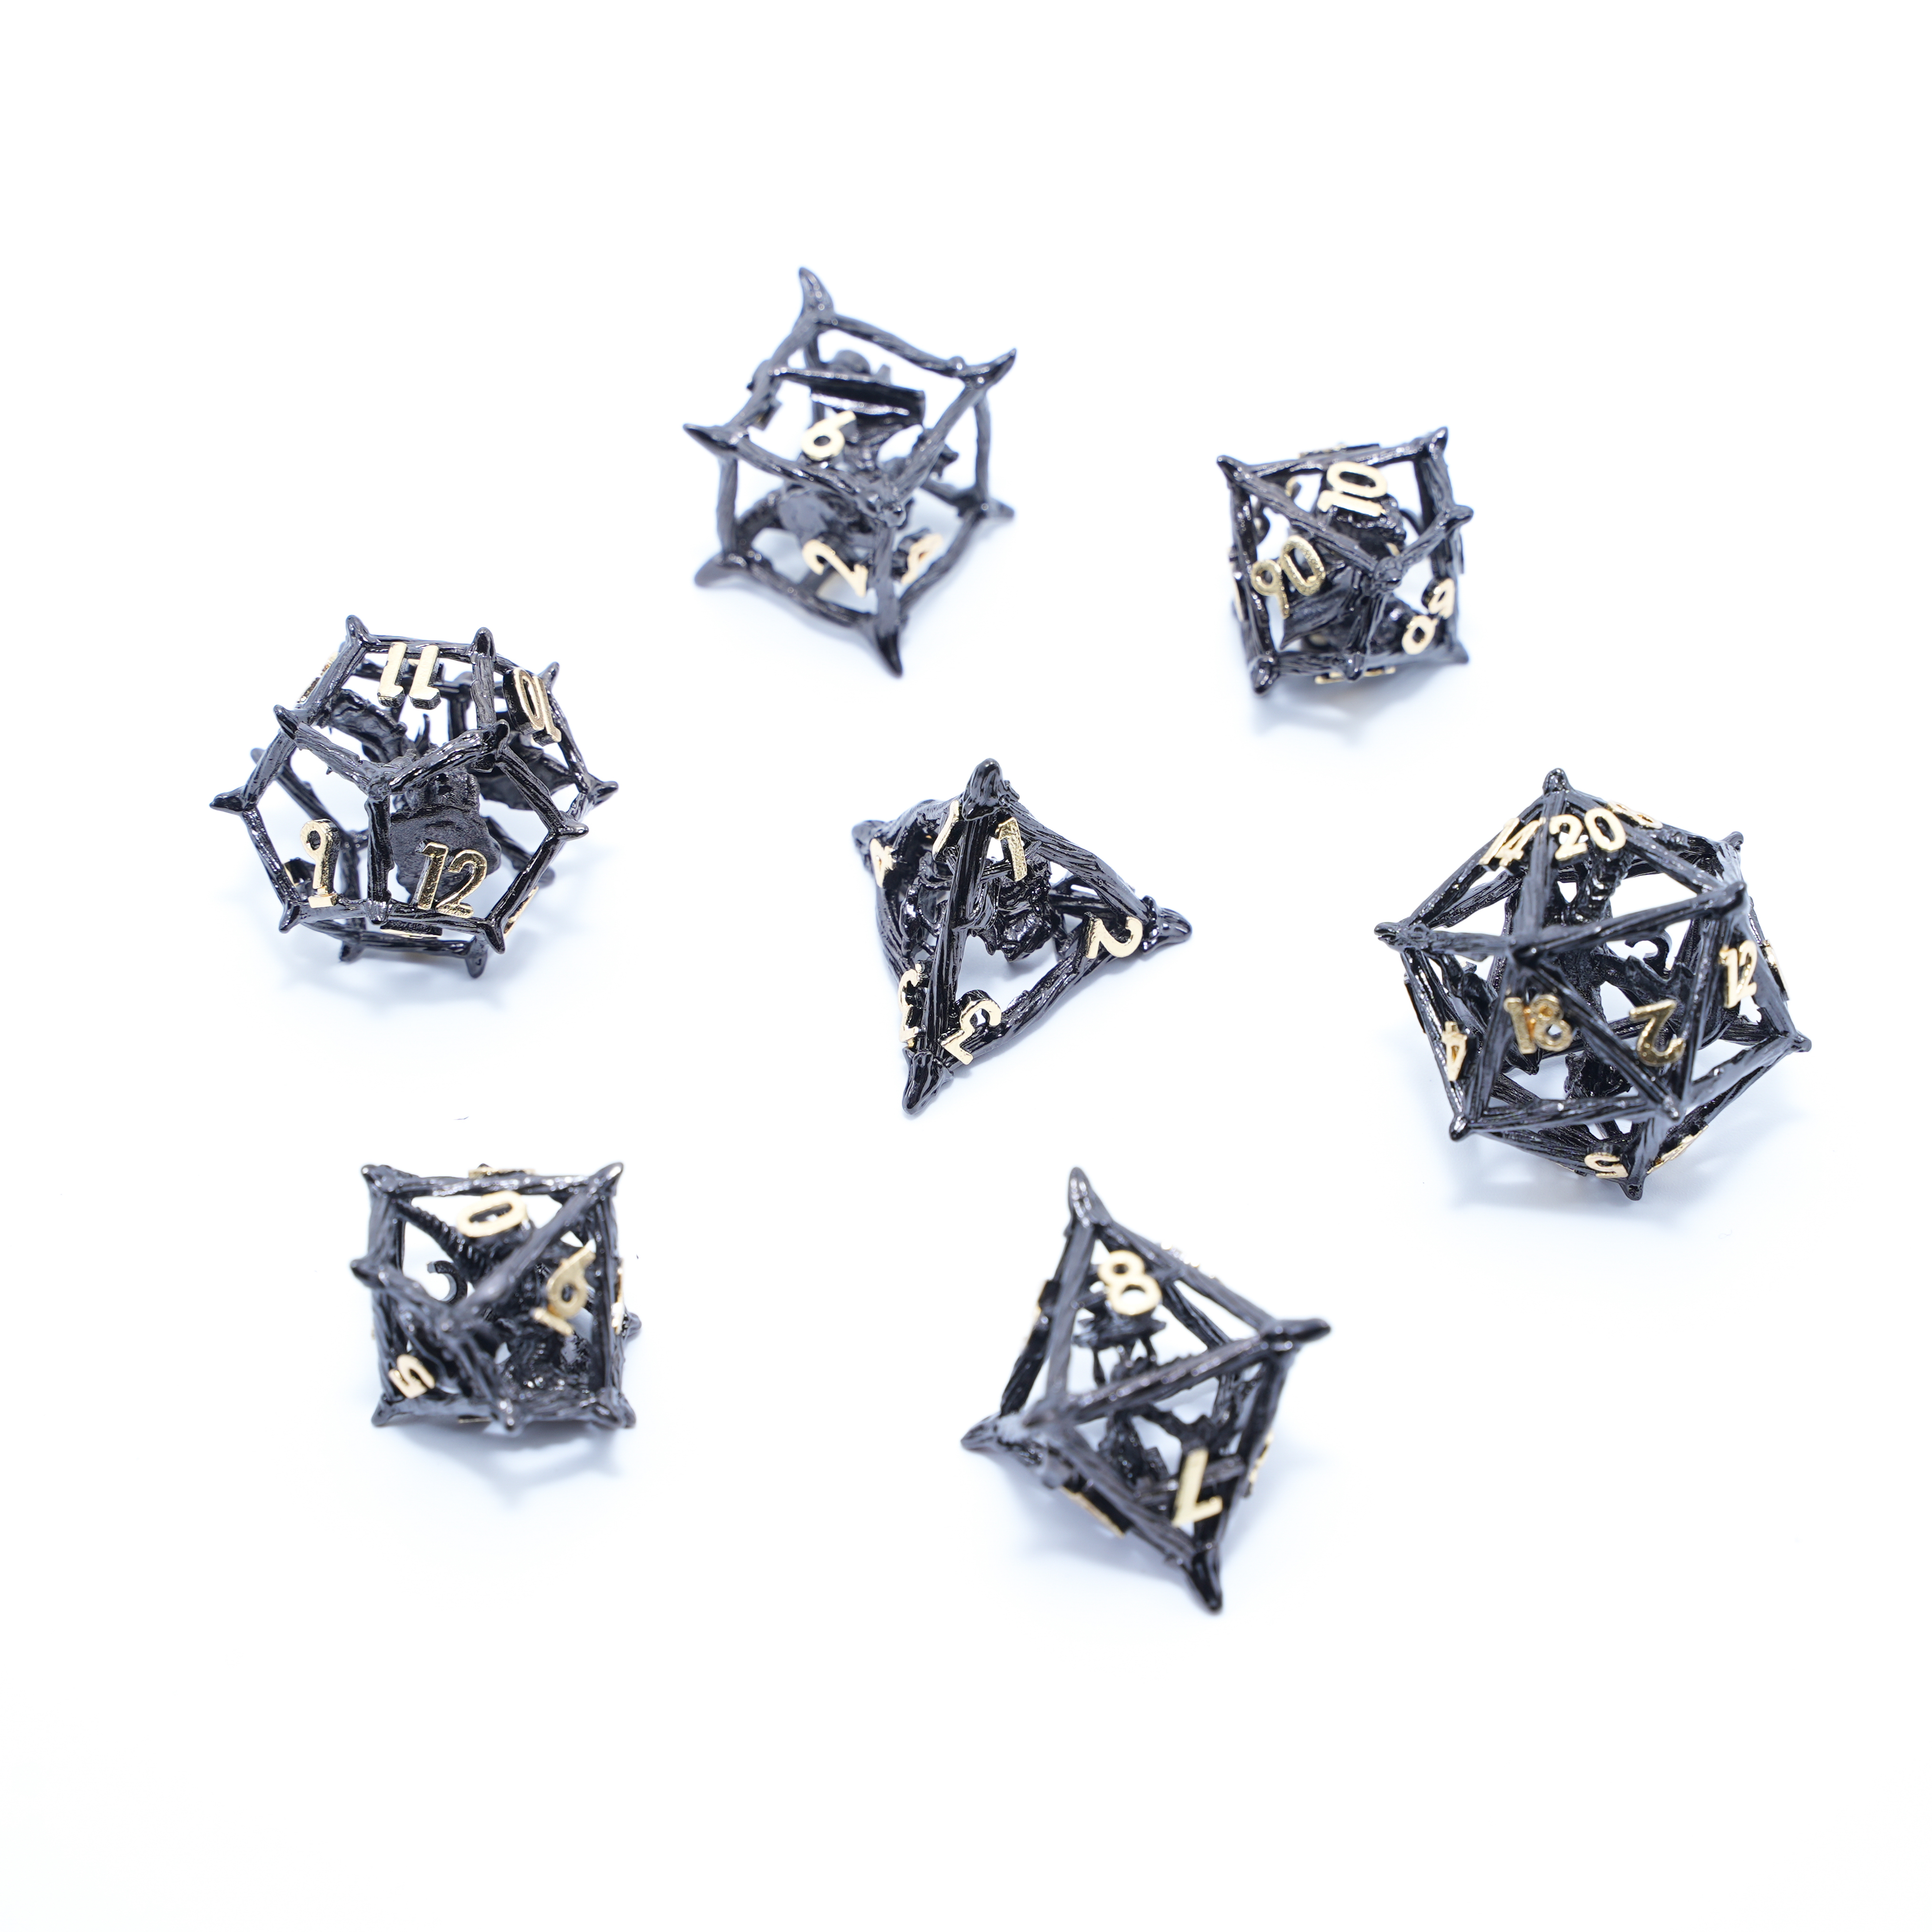 Get Your Hands on Unique Spike 3D Dragon Dice from Factory - Packaged in OPP Bag or Micro Iron Box!